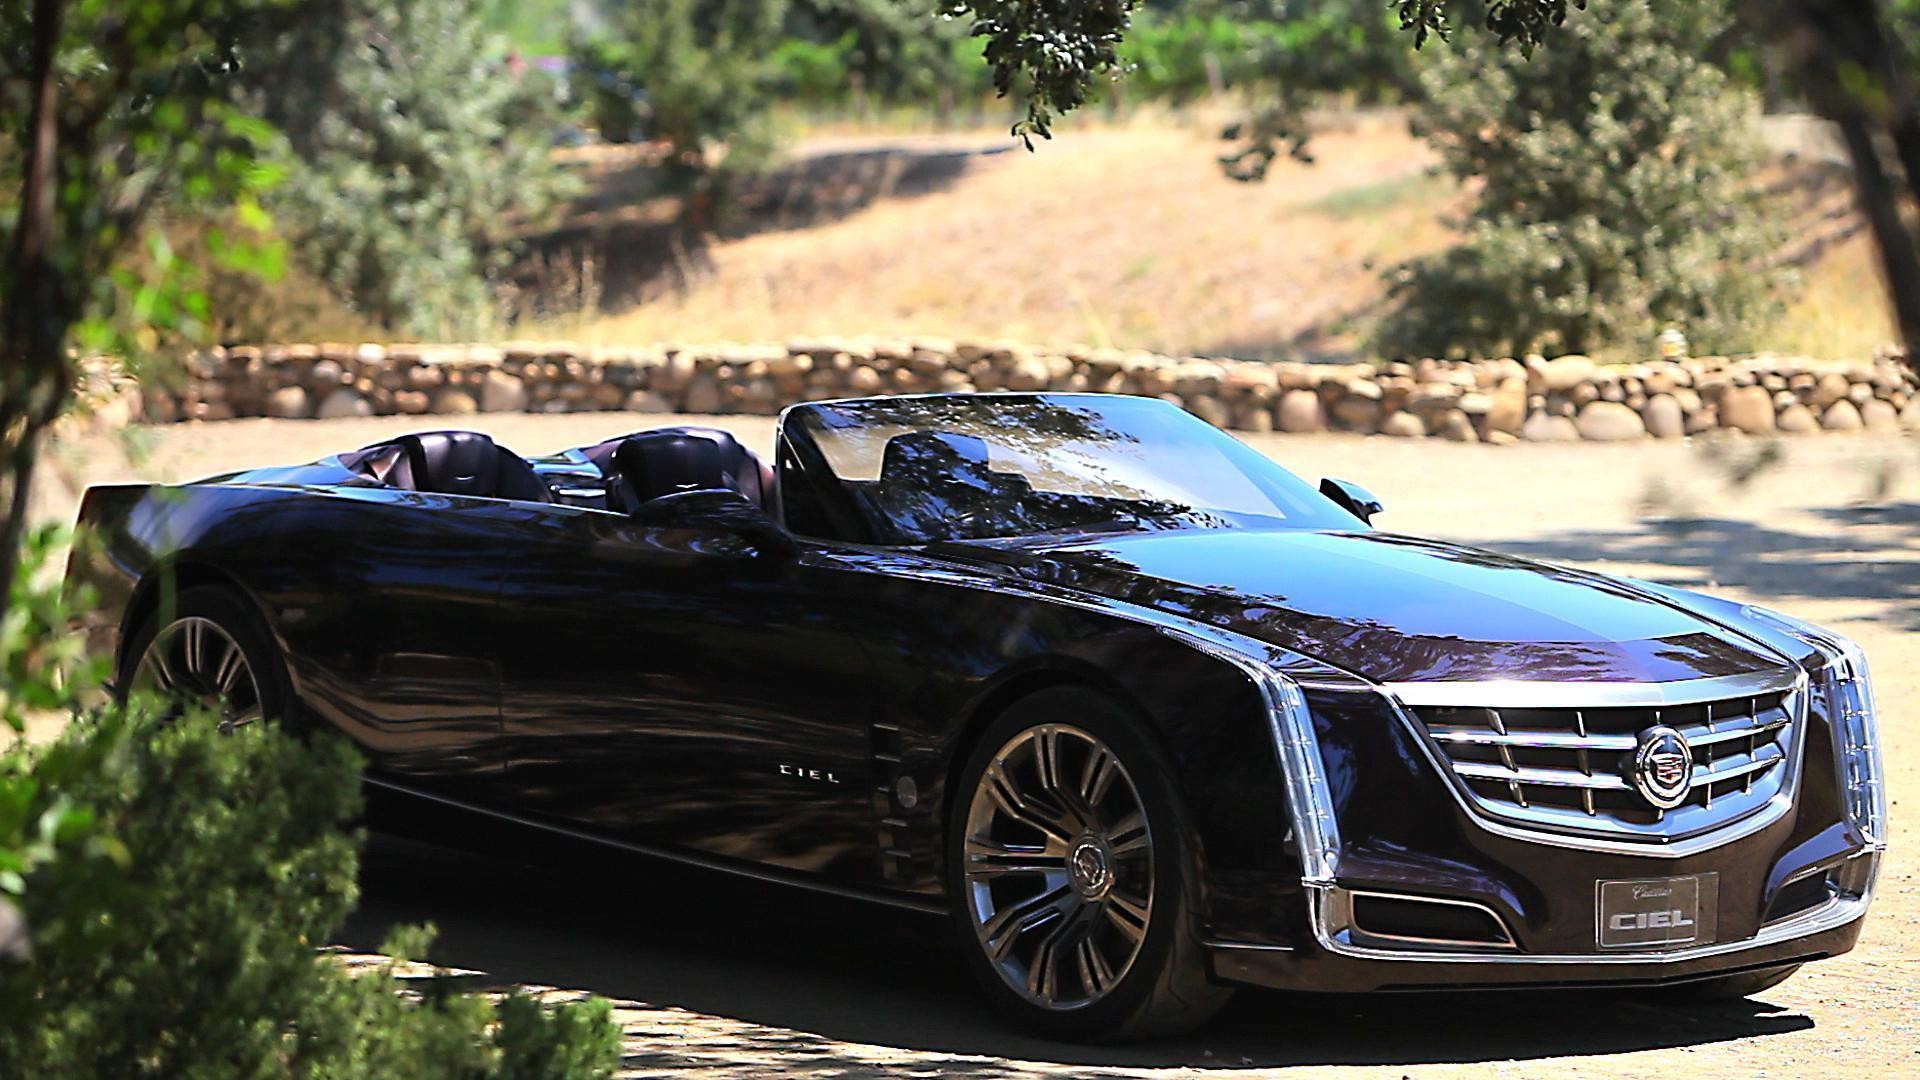 1920x1080 Cadillac Background for Desktop | HD Wallpapers, Backgrounds .